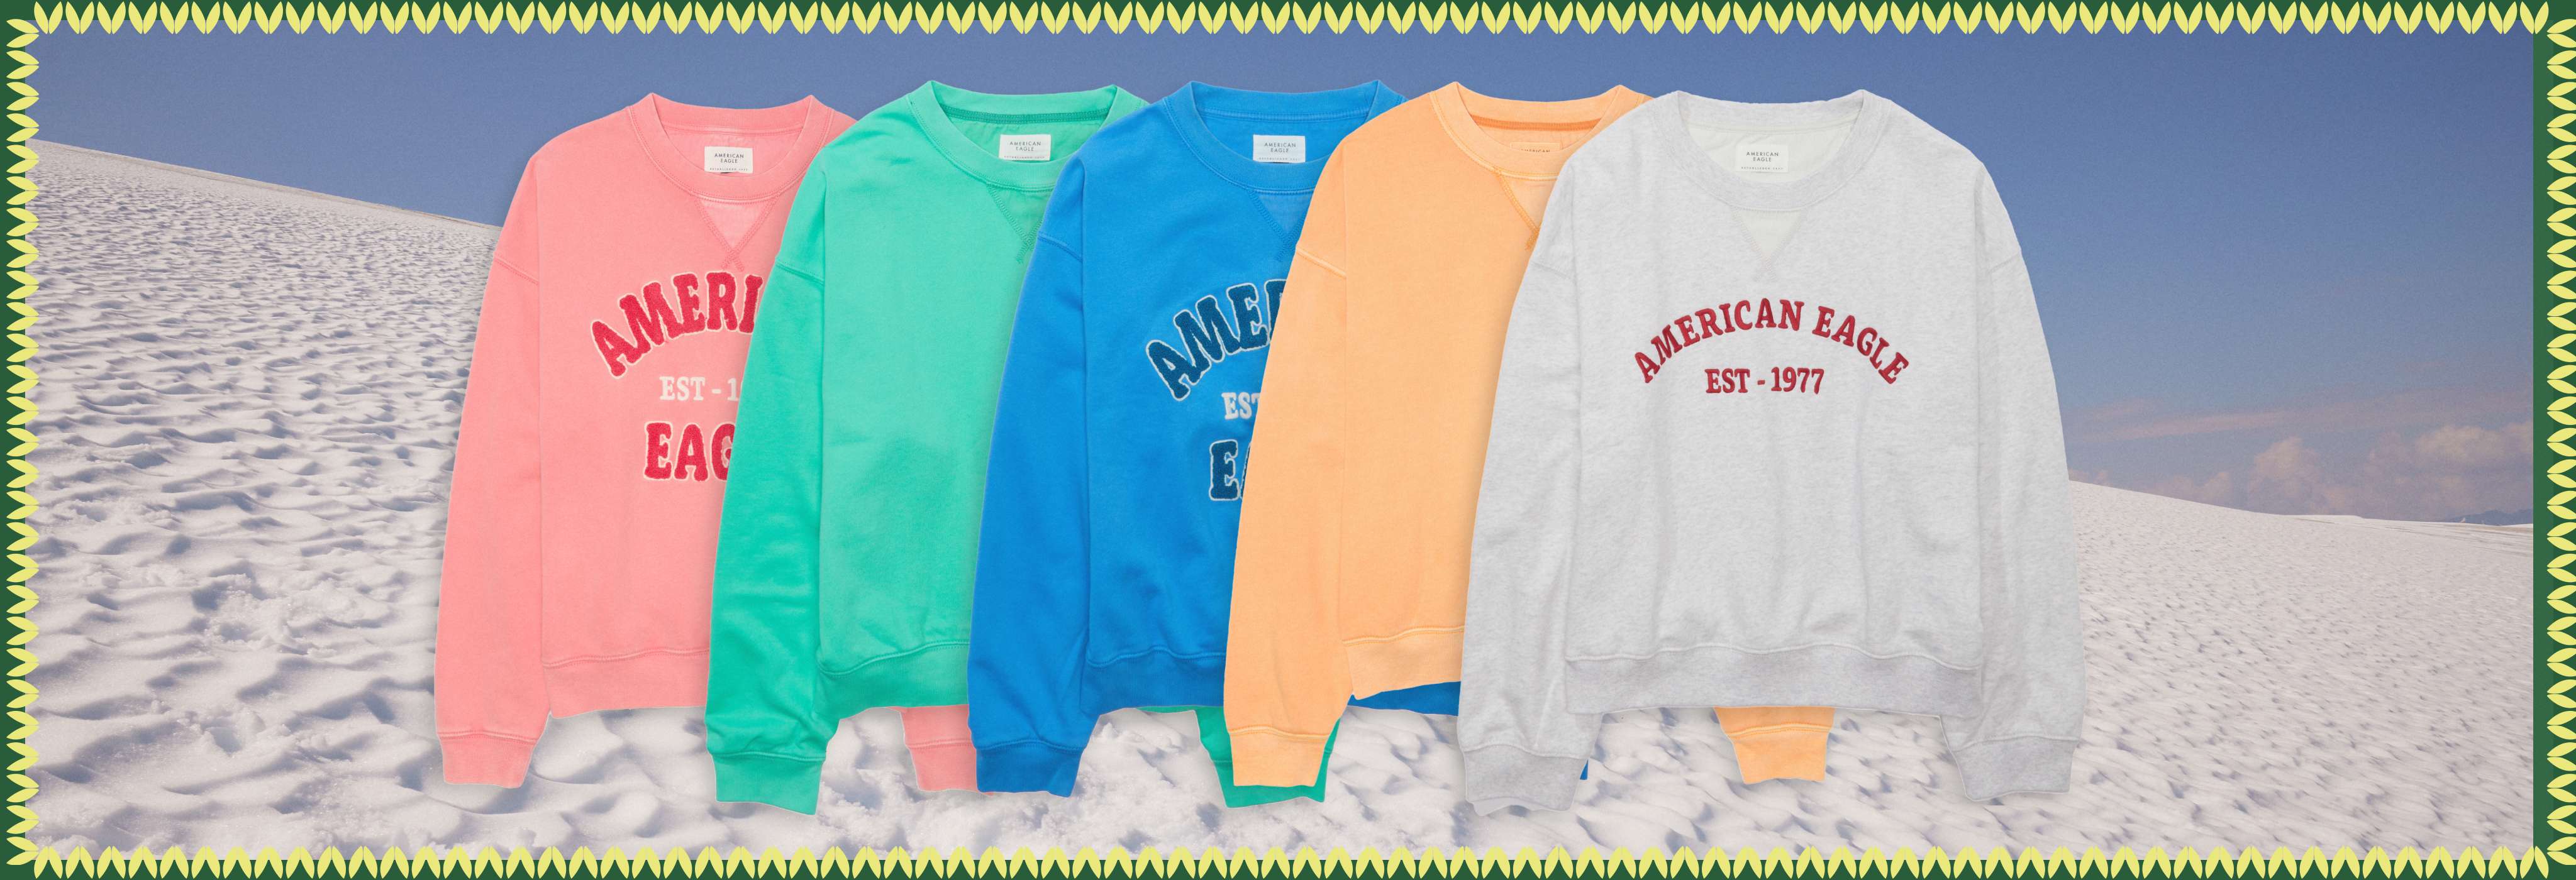 Women's Gotta-Have Gifts: Funday Sweatshirts | American Eagle